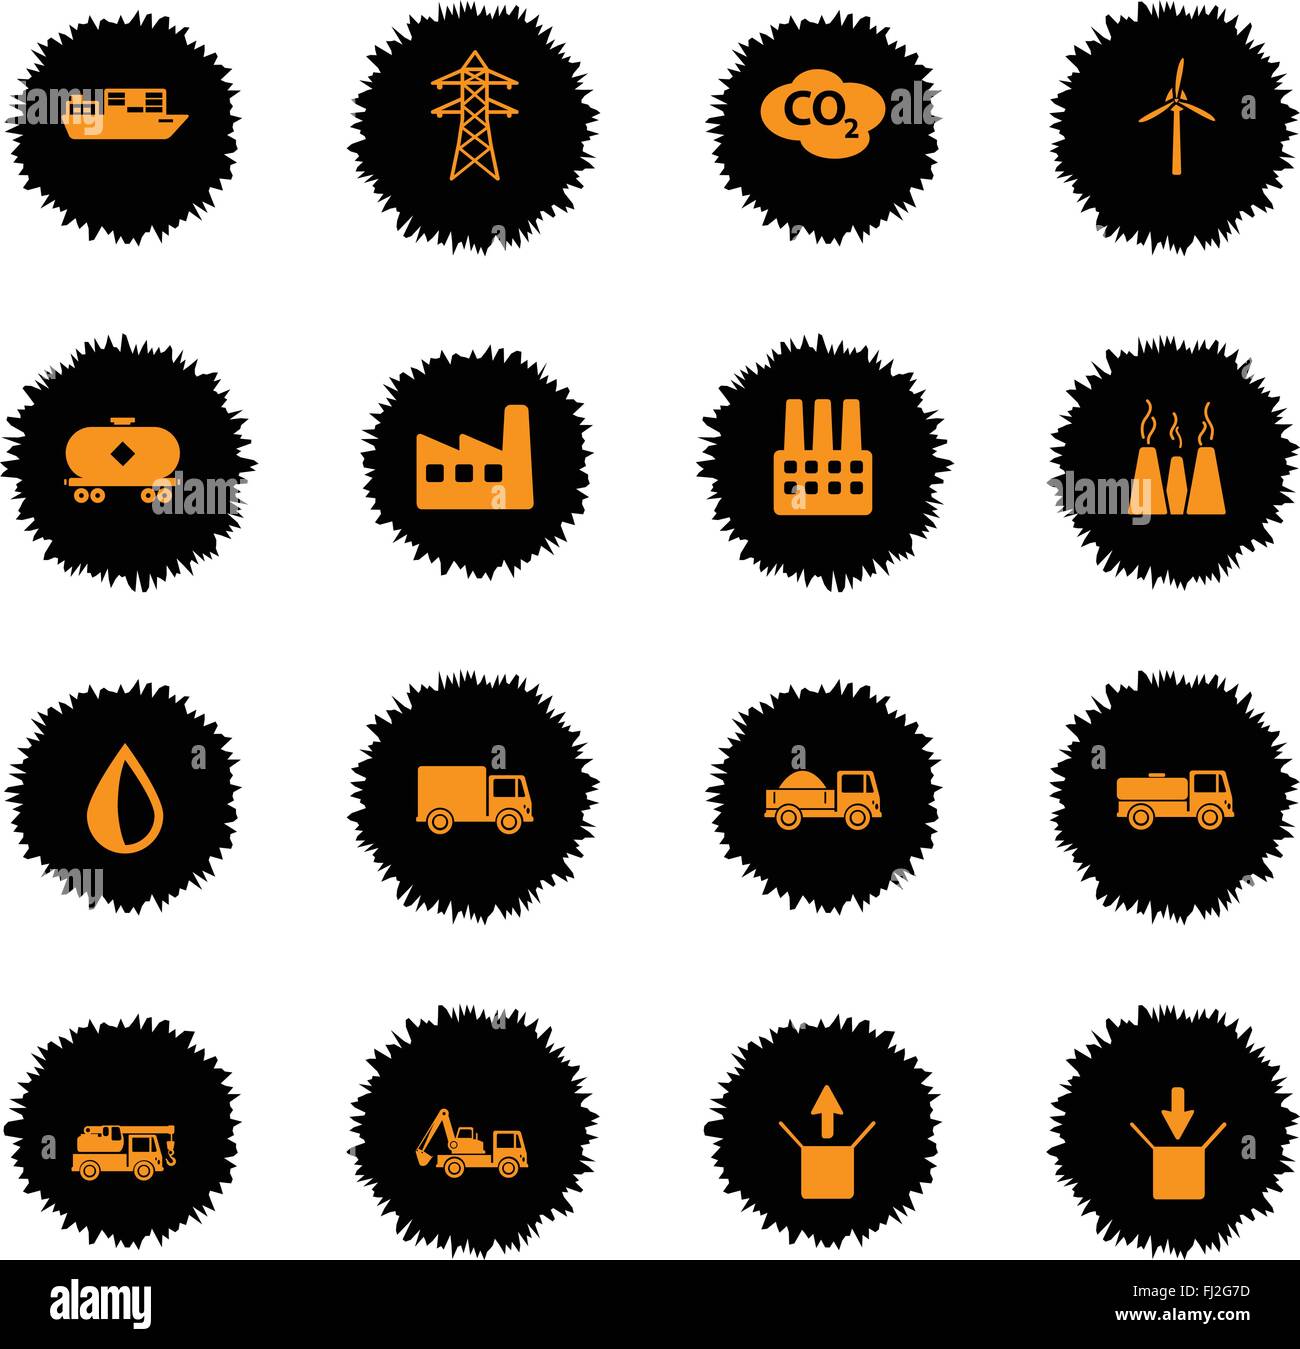 Industrial simply icons Stock Vector